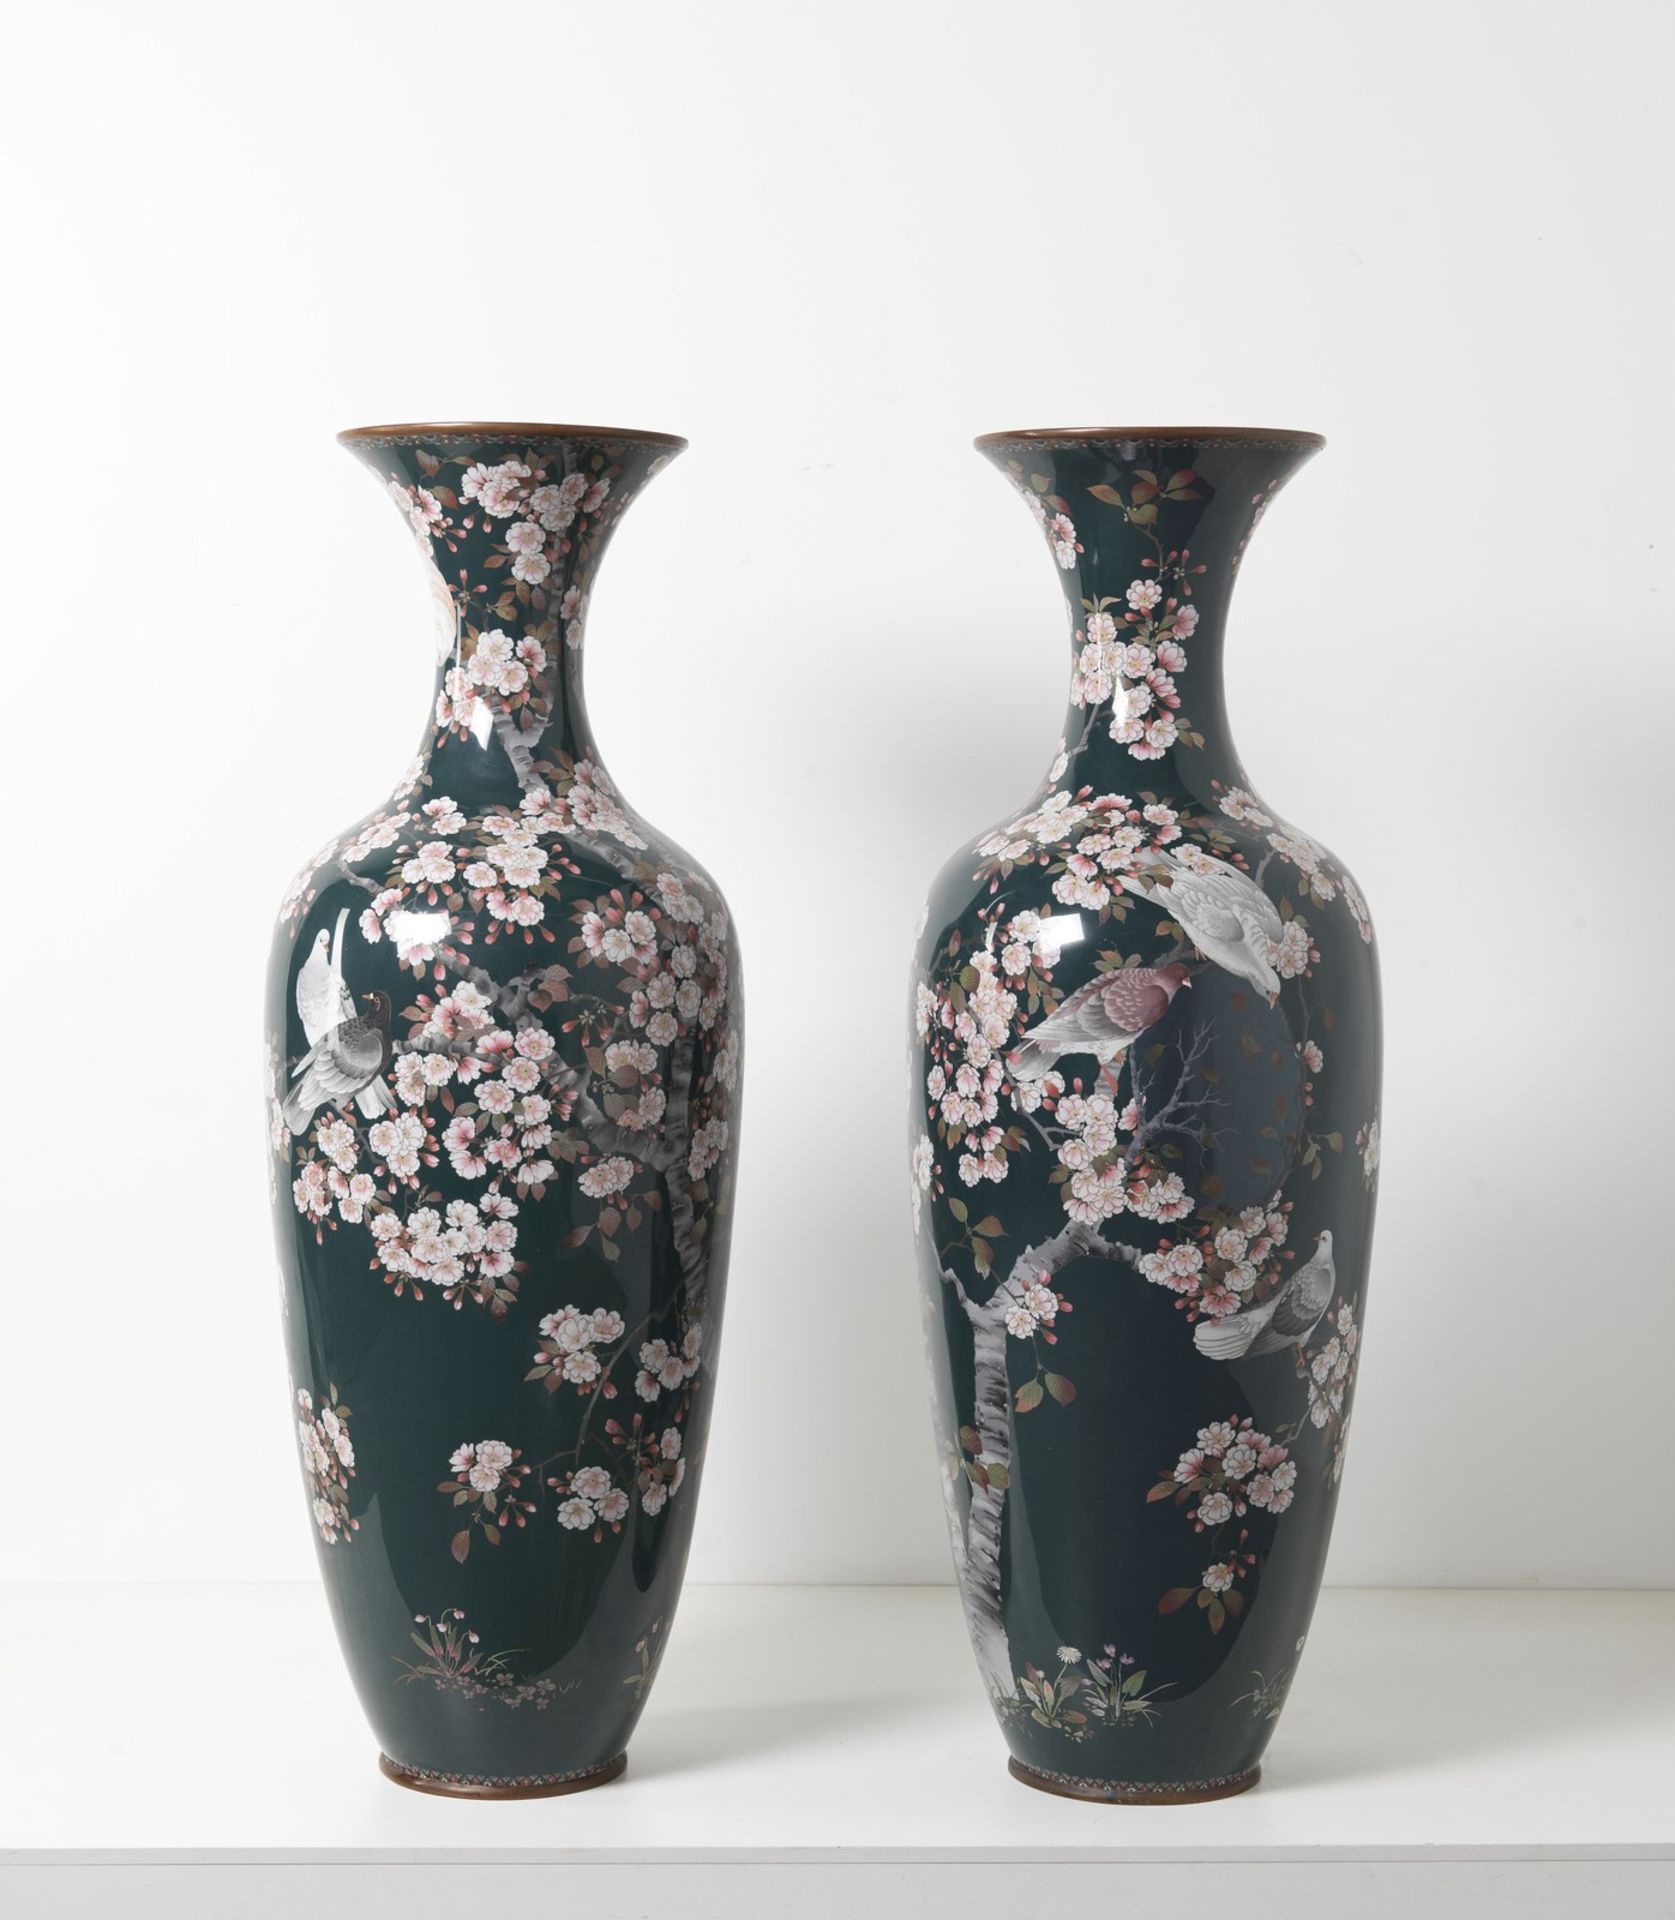 ARTE GIAPPONESE A pair of monumental cloisonnè vases Japan, Meiji/Taisho period, 19th-20th century - Image 4 of 5